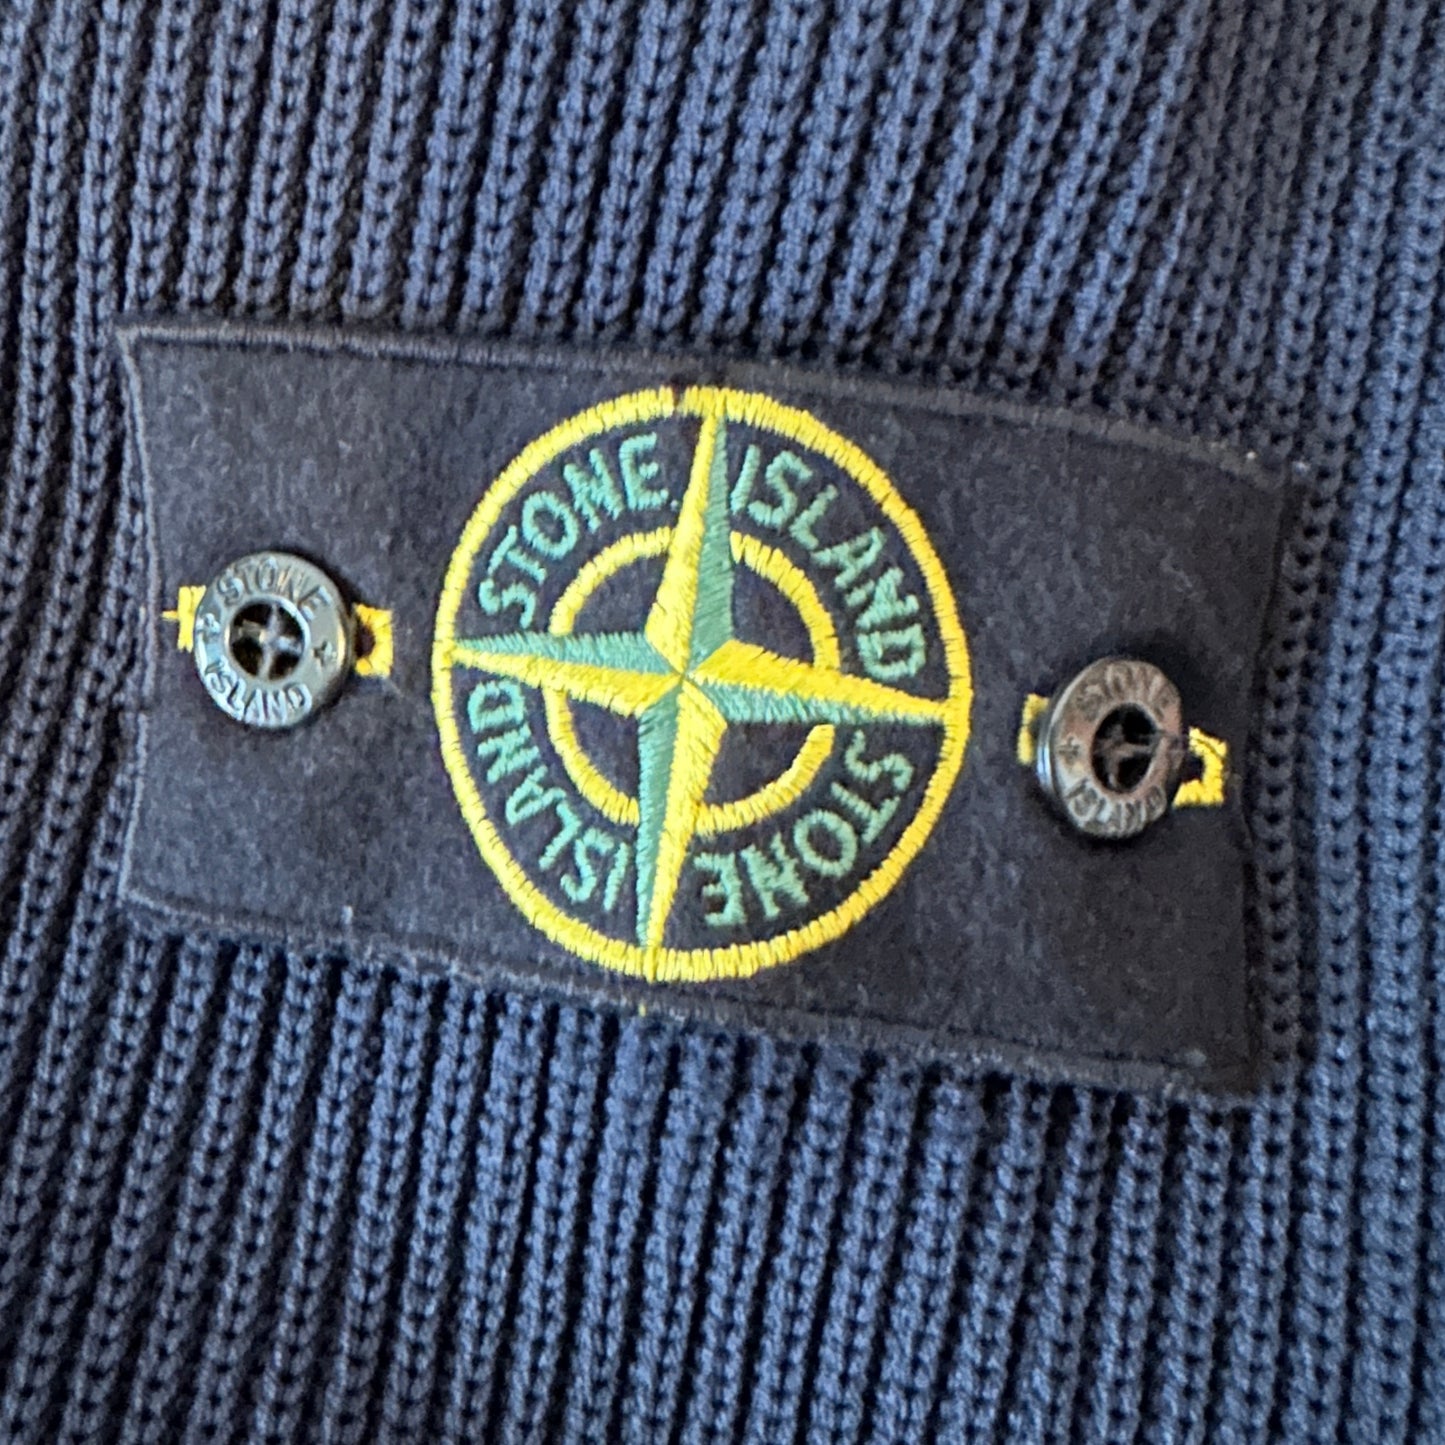 Stone Island 2016 Nylon Metal / Knit Hooded Jacket - L - Made in Italy